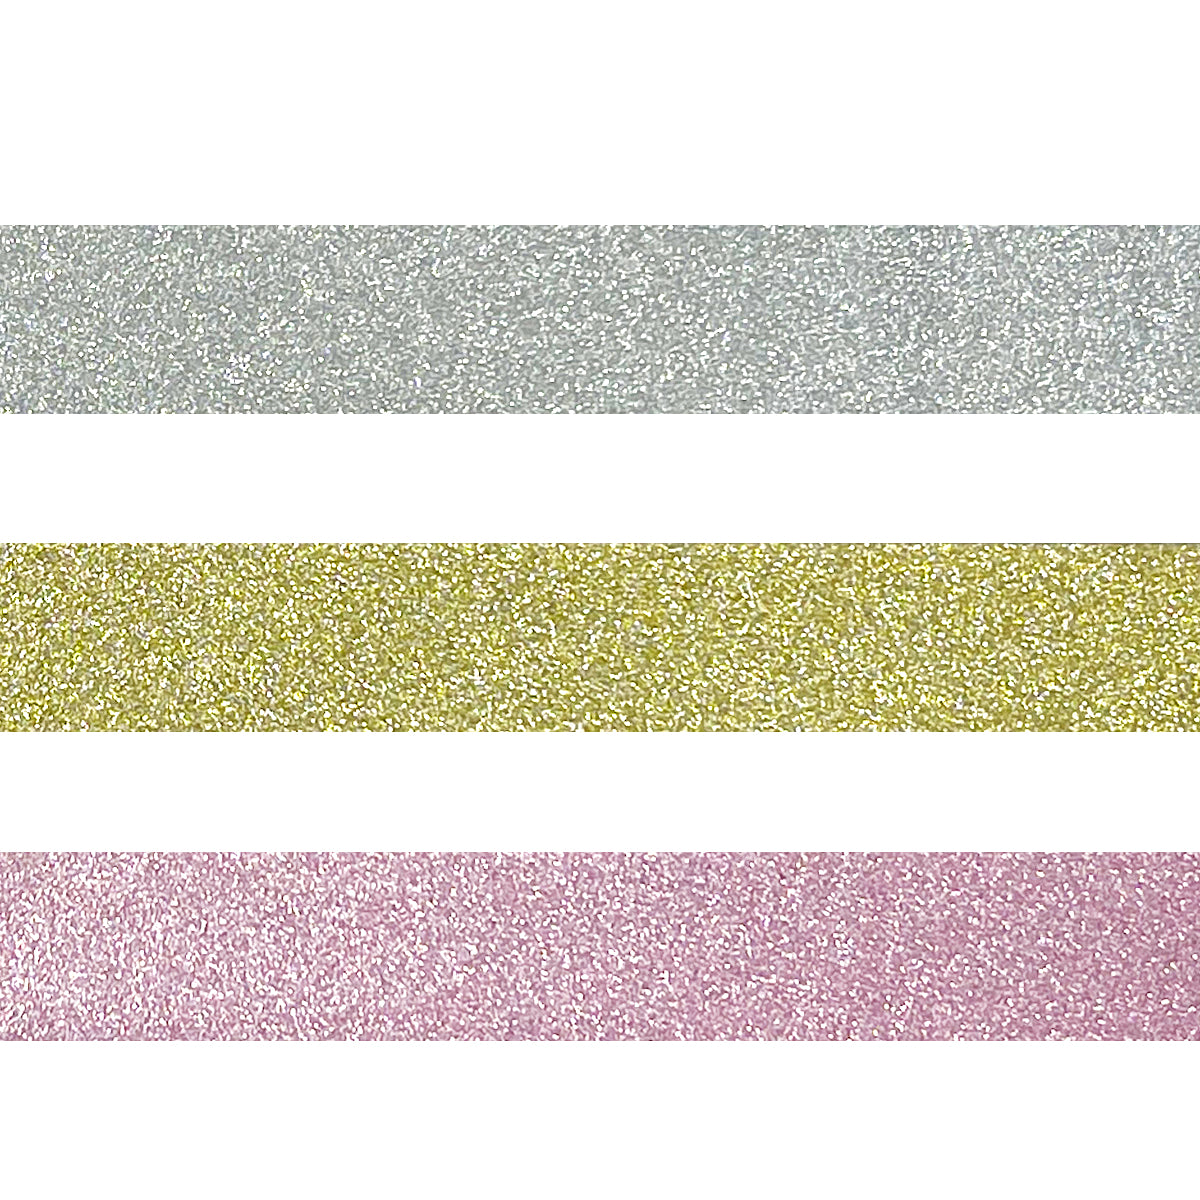 Wrapables Glitter and Shine Washi Tapes Decorative Masking Tapes (Set of 3) Silver Glitter Stars